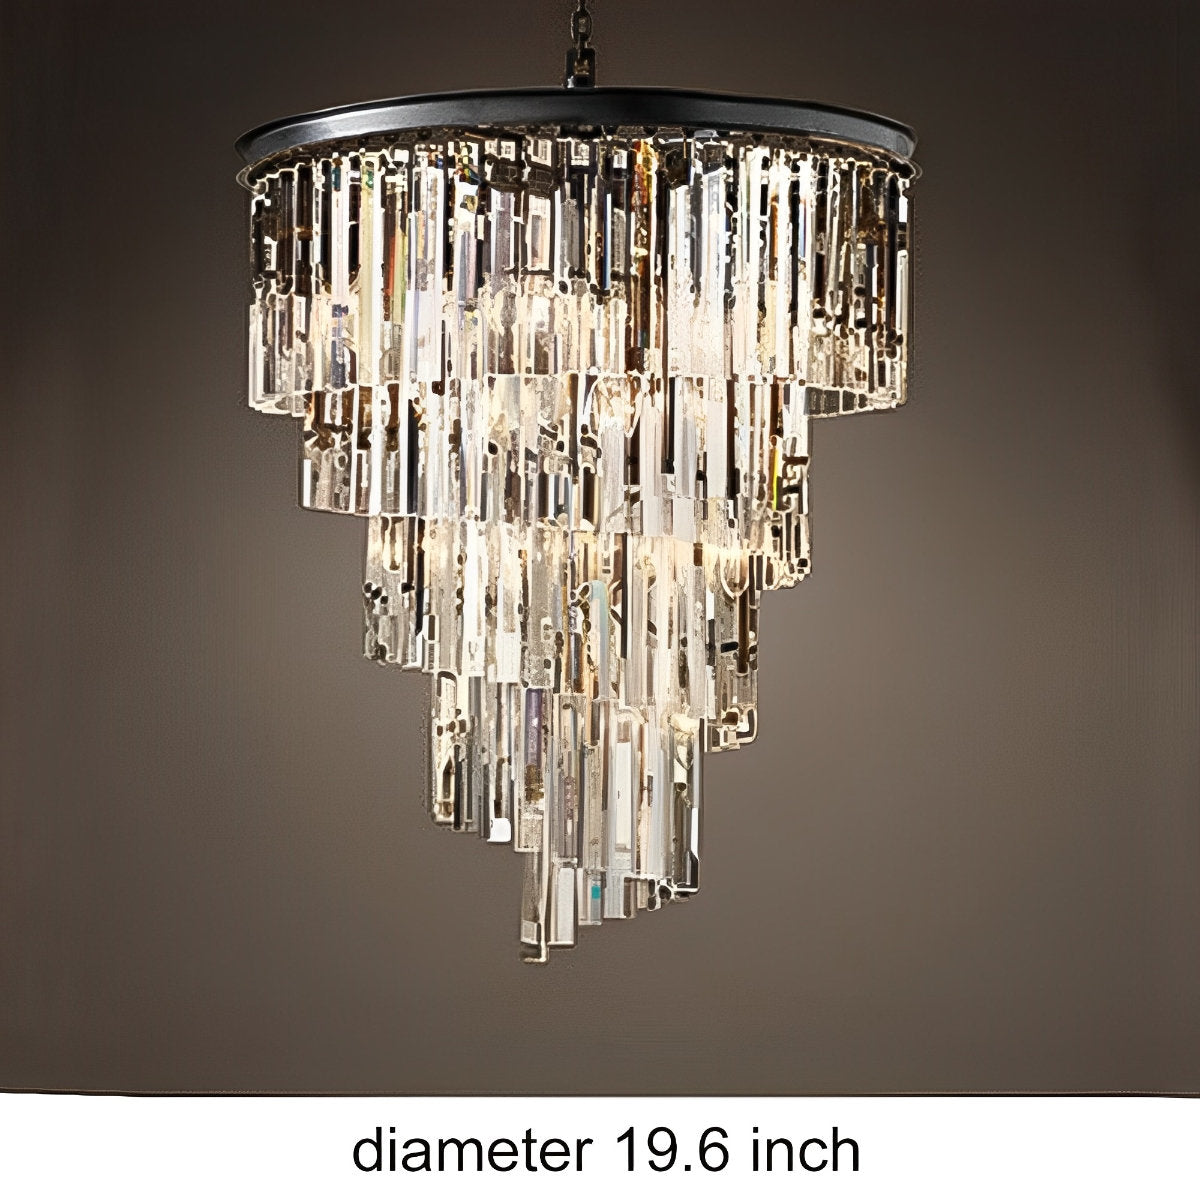 Classical Rustic Spiral Shining Crystal Chandelier - Flyachilles